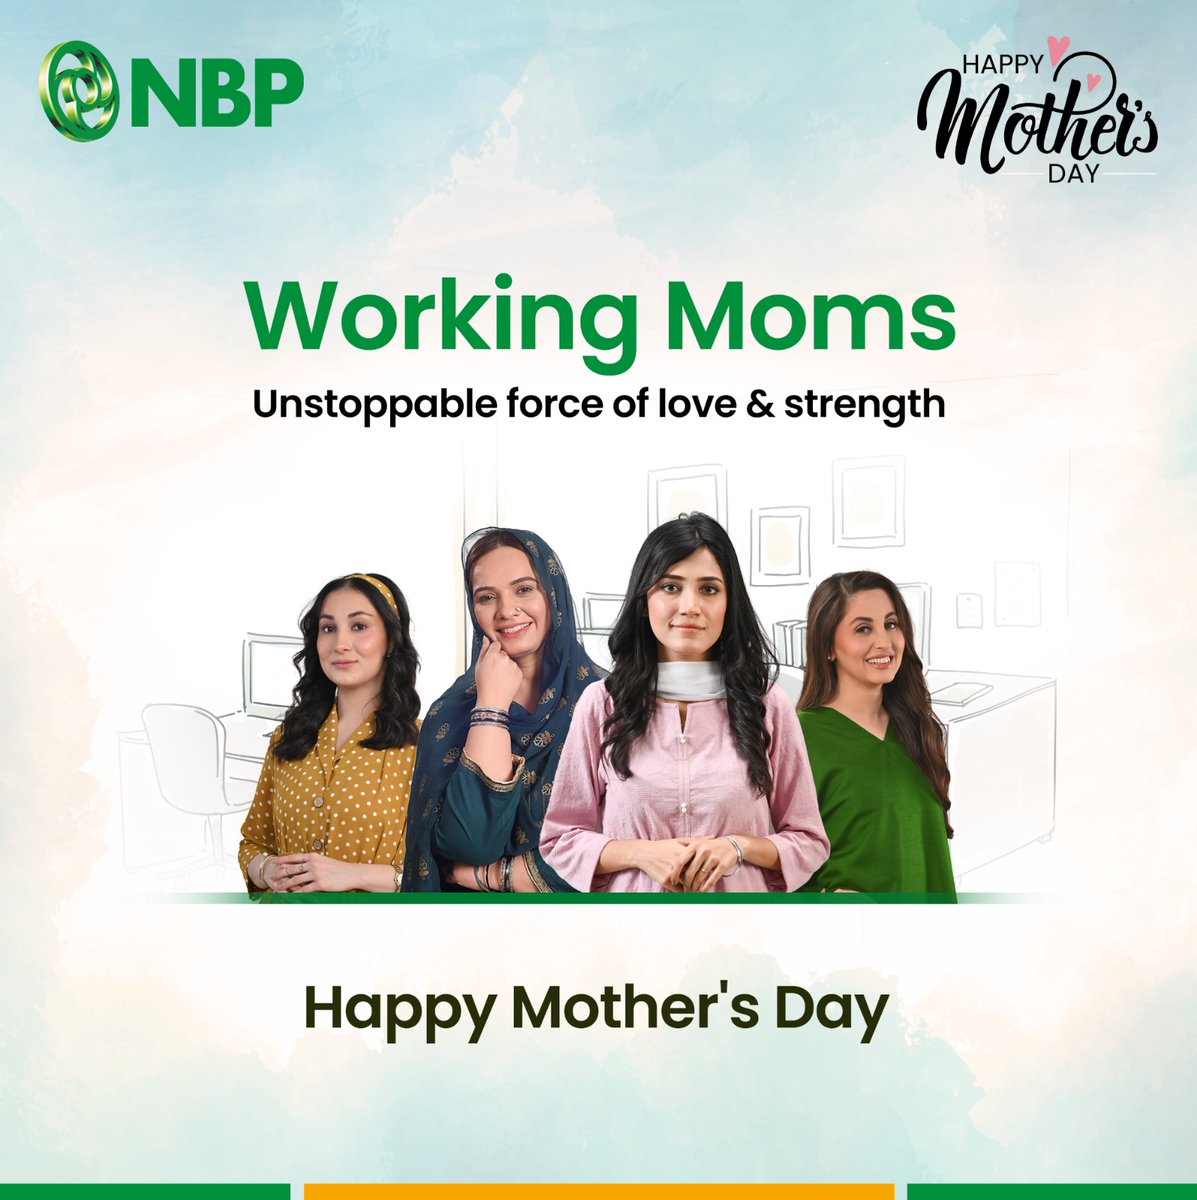 #HappyMothersDay to all the working moms who are an unstoppable force of love and strength. National Bank of Pakistan salutes your dedication. #NBP #NationalBankOfPakistan #NBPSupportsMoms #EmpoweringWomen #MothersDay